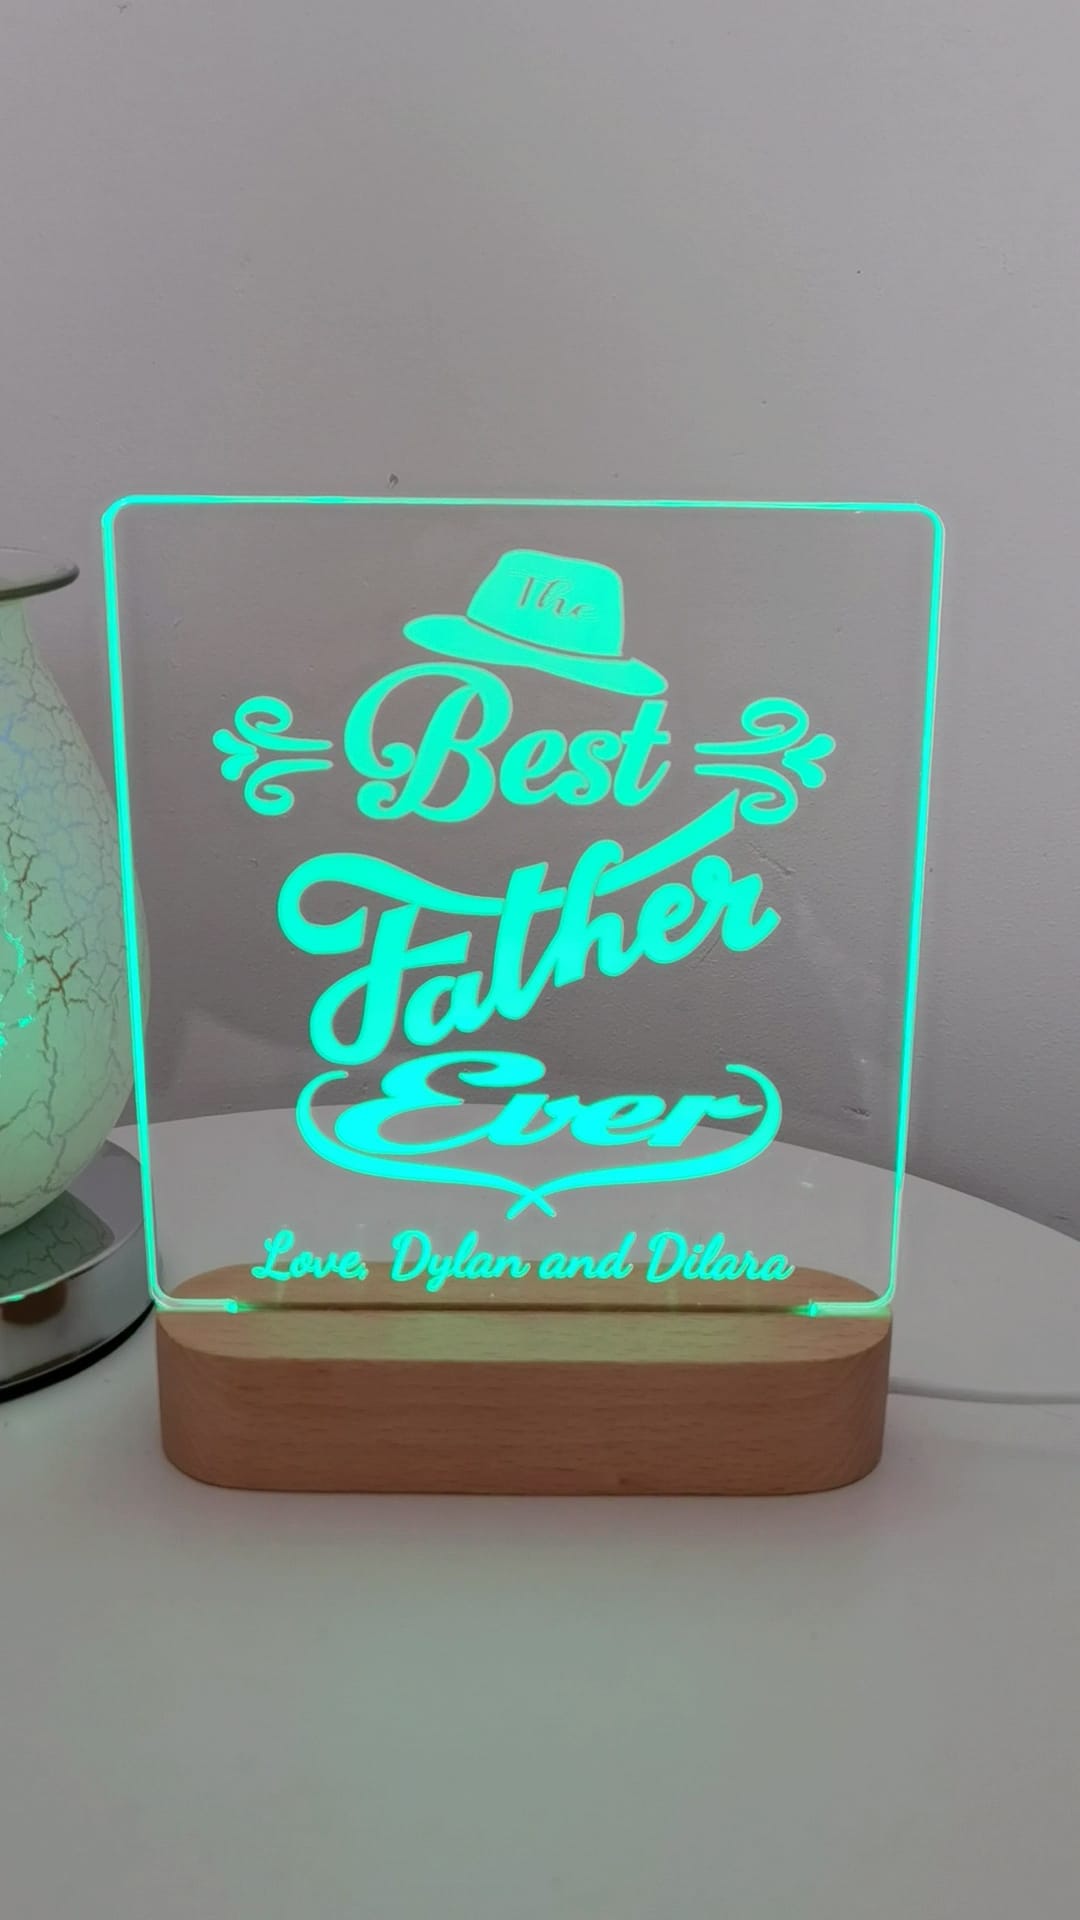 Personalised acrylic LED night light with a wooden base a perfect Father's Day gift!